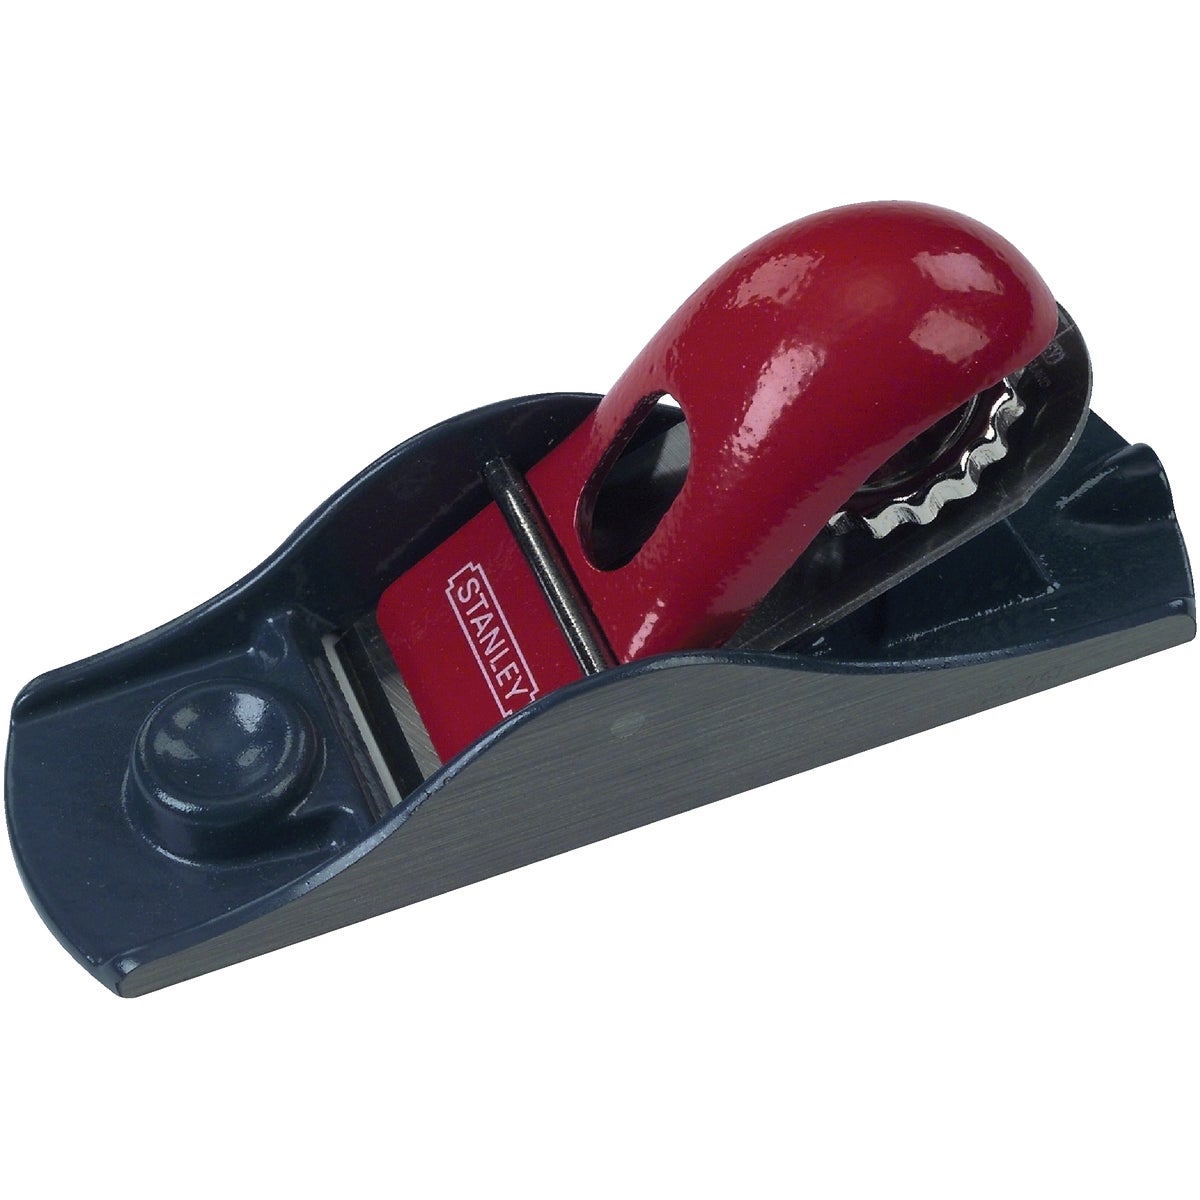 Stanley 6-5/8 In. Adjustable Block Plane with 1-5/8 In. Cutter